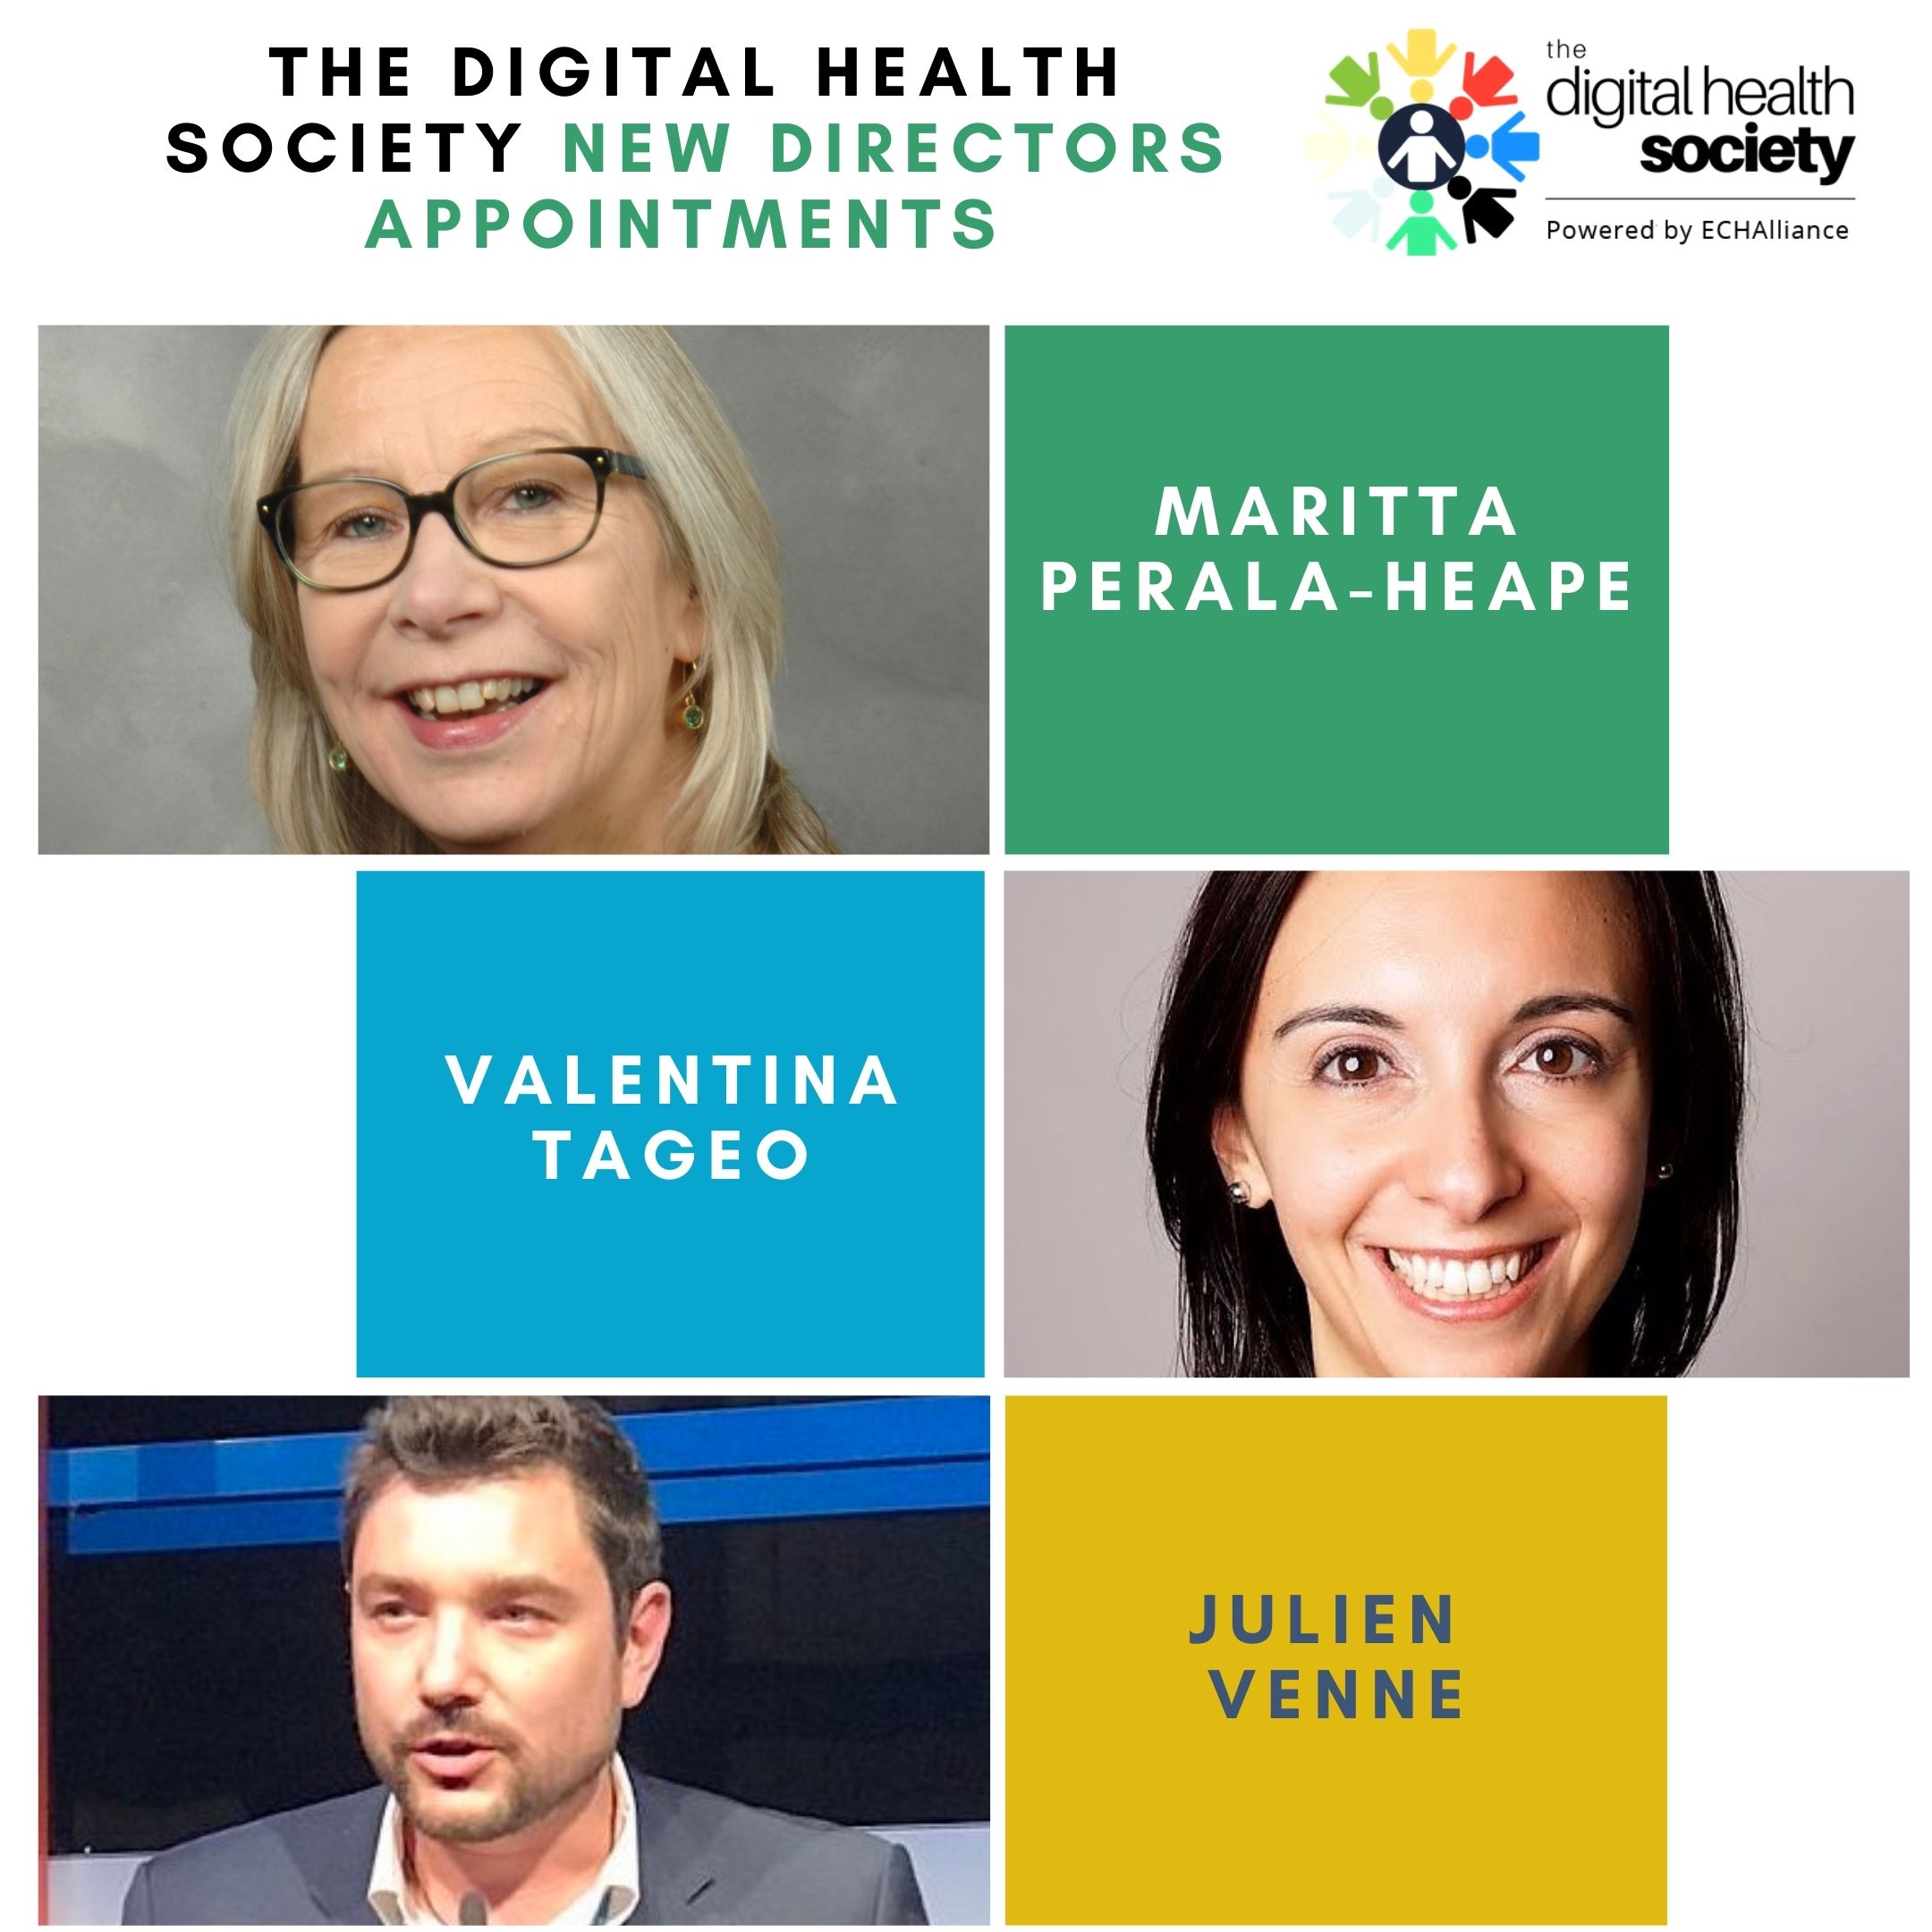 The Digital Health Society (DHS) New Directors Appointments